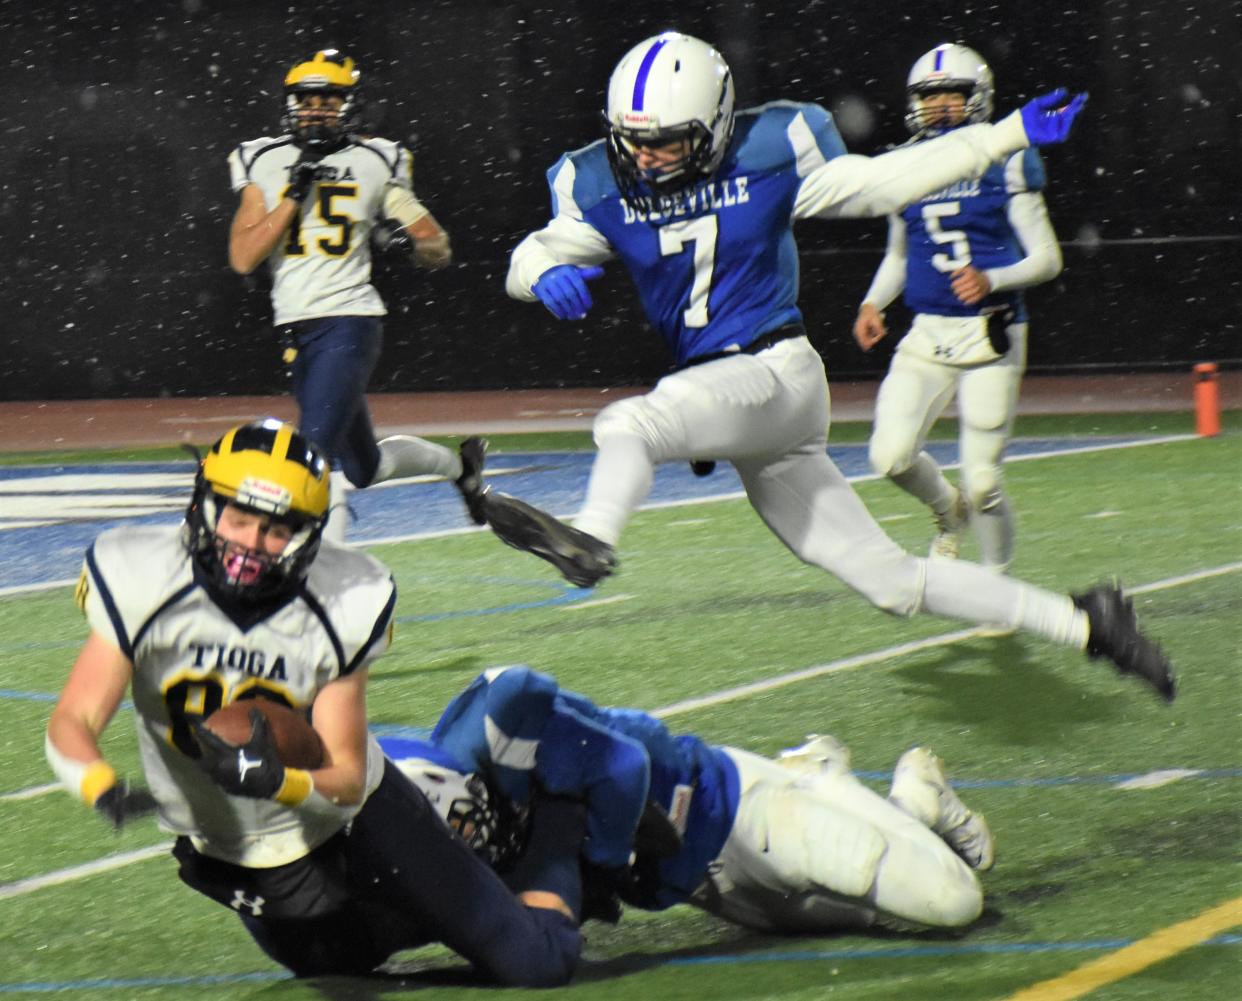 Dolgeville Blue Devil Connor Kraszewski (7) leaps over teammate Isaiah Rathbun's tackle of Tioga Tiger Karson Sindoni during the 2022 Class D regional playoff game at Michael J. Bragman Stadium. Dolgville and defending champion Tioga meet in the state playoffs for the third year in a row Friday.